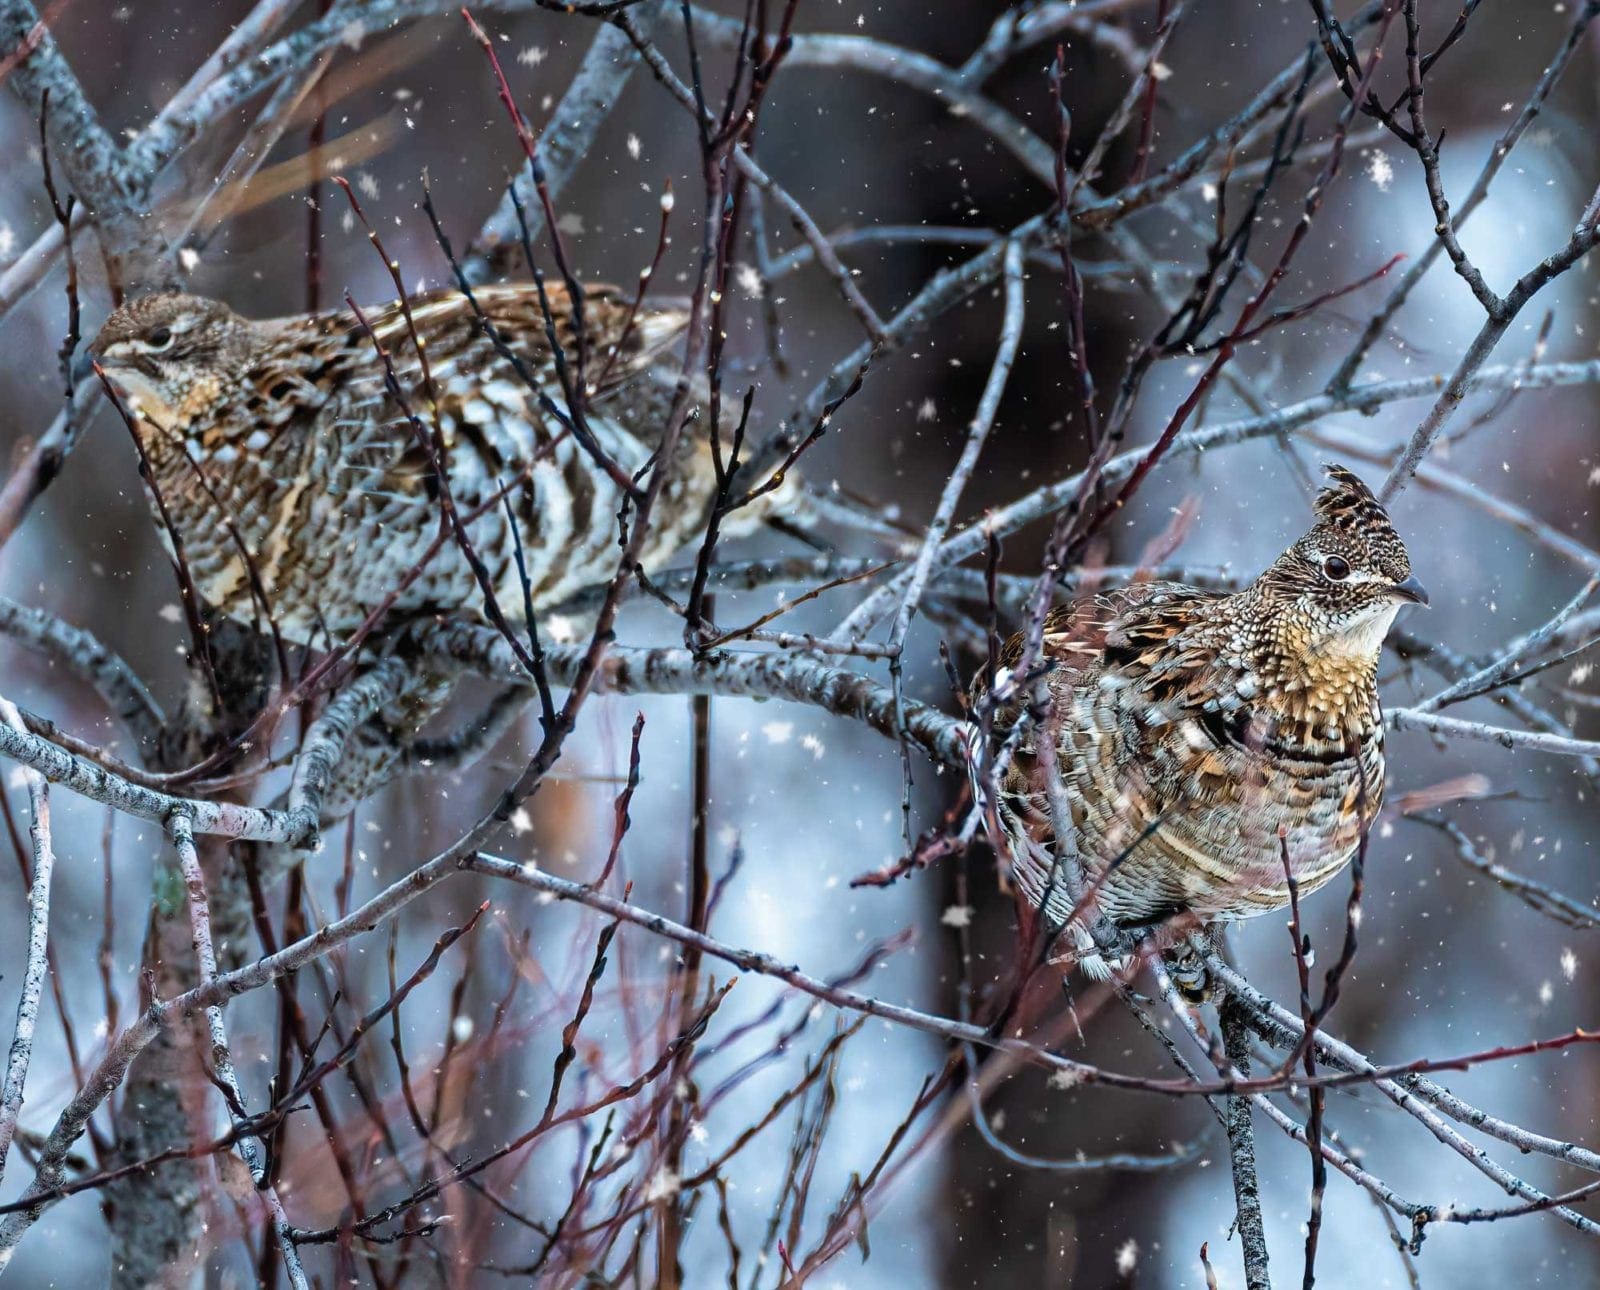 A ruffed grouse sitting in a tree